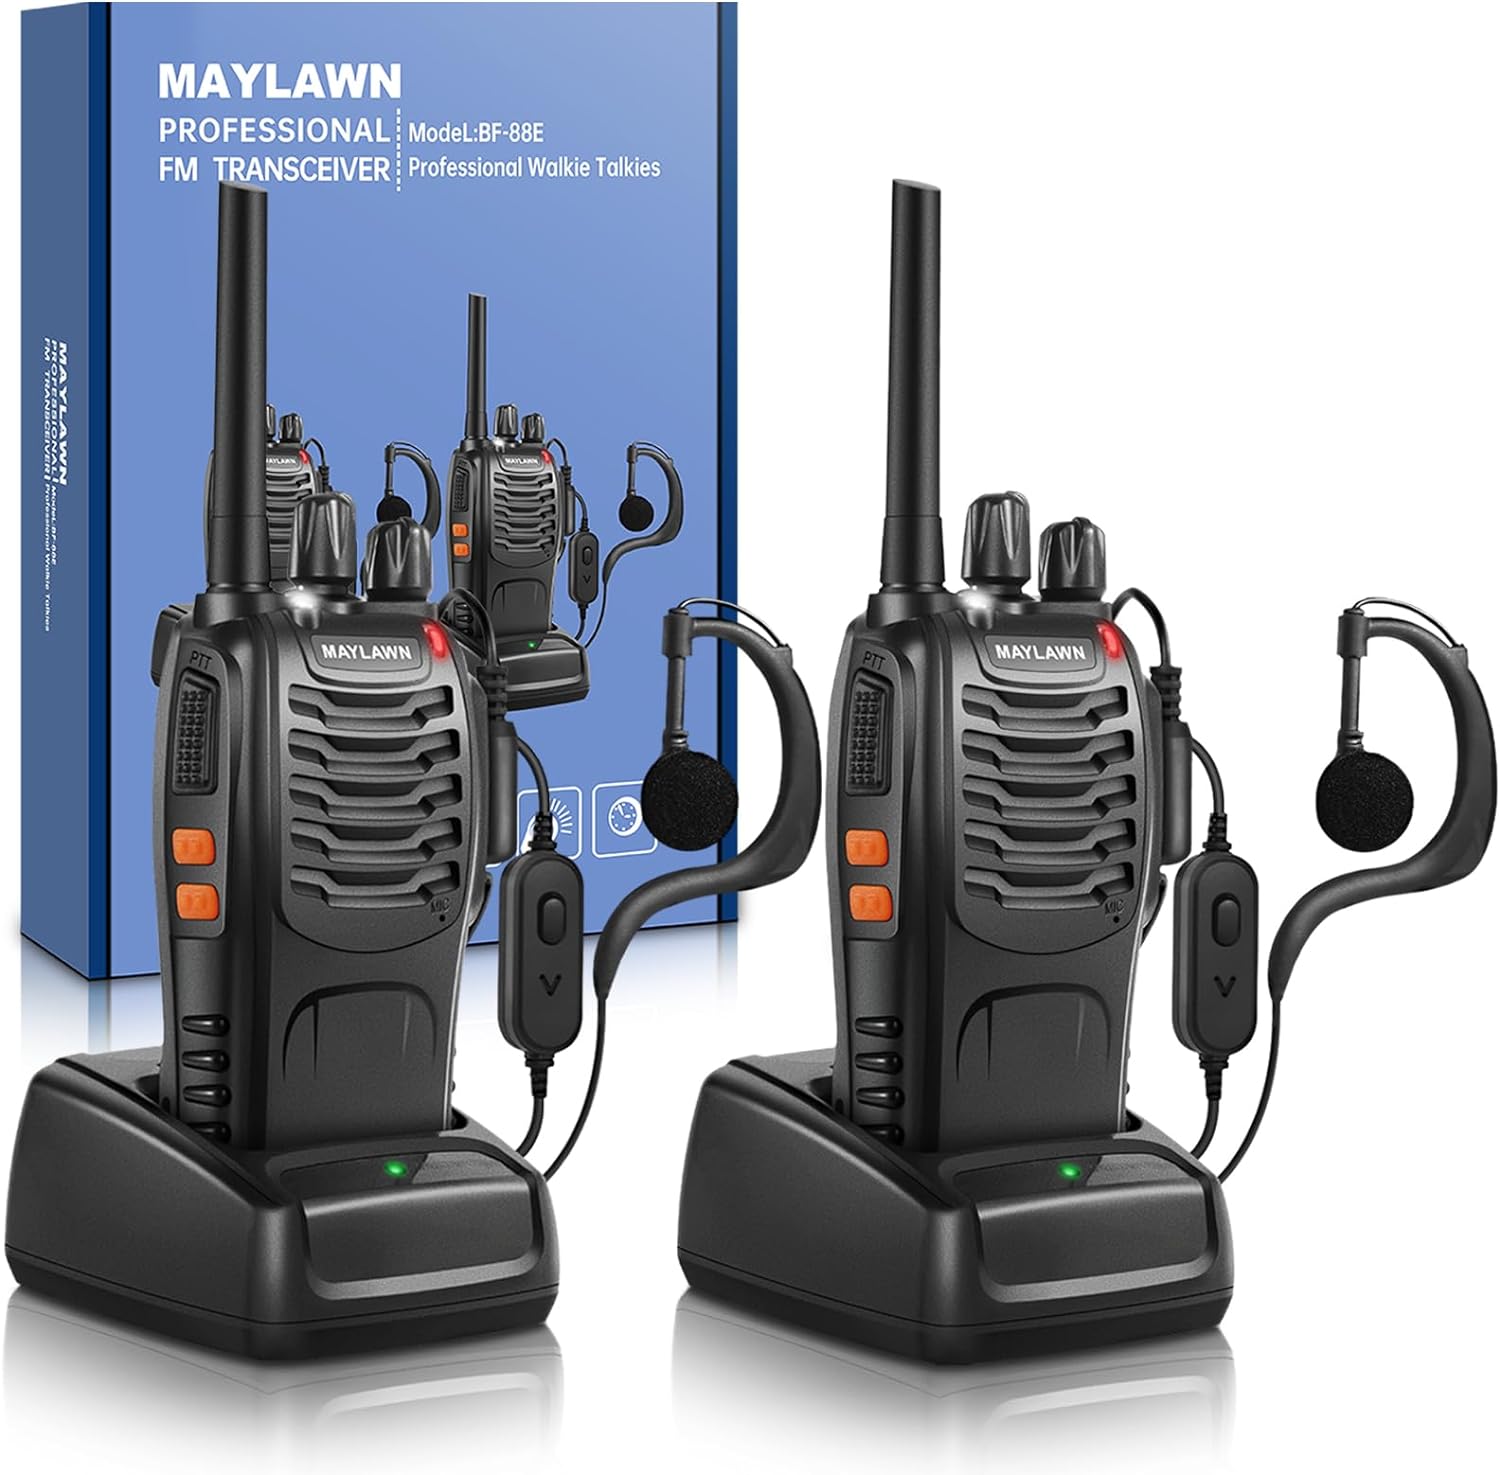 Maylawn Walkie Talkies Long Range 2Pcs, Walkie Talkies for Adults with Rechargeable Batteries, 2 Way Radio with LED Light Earpieces 16CH Supports VOX Function